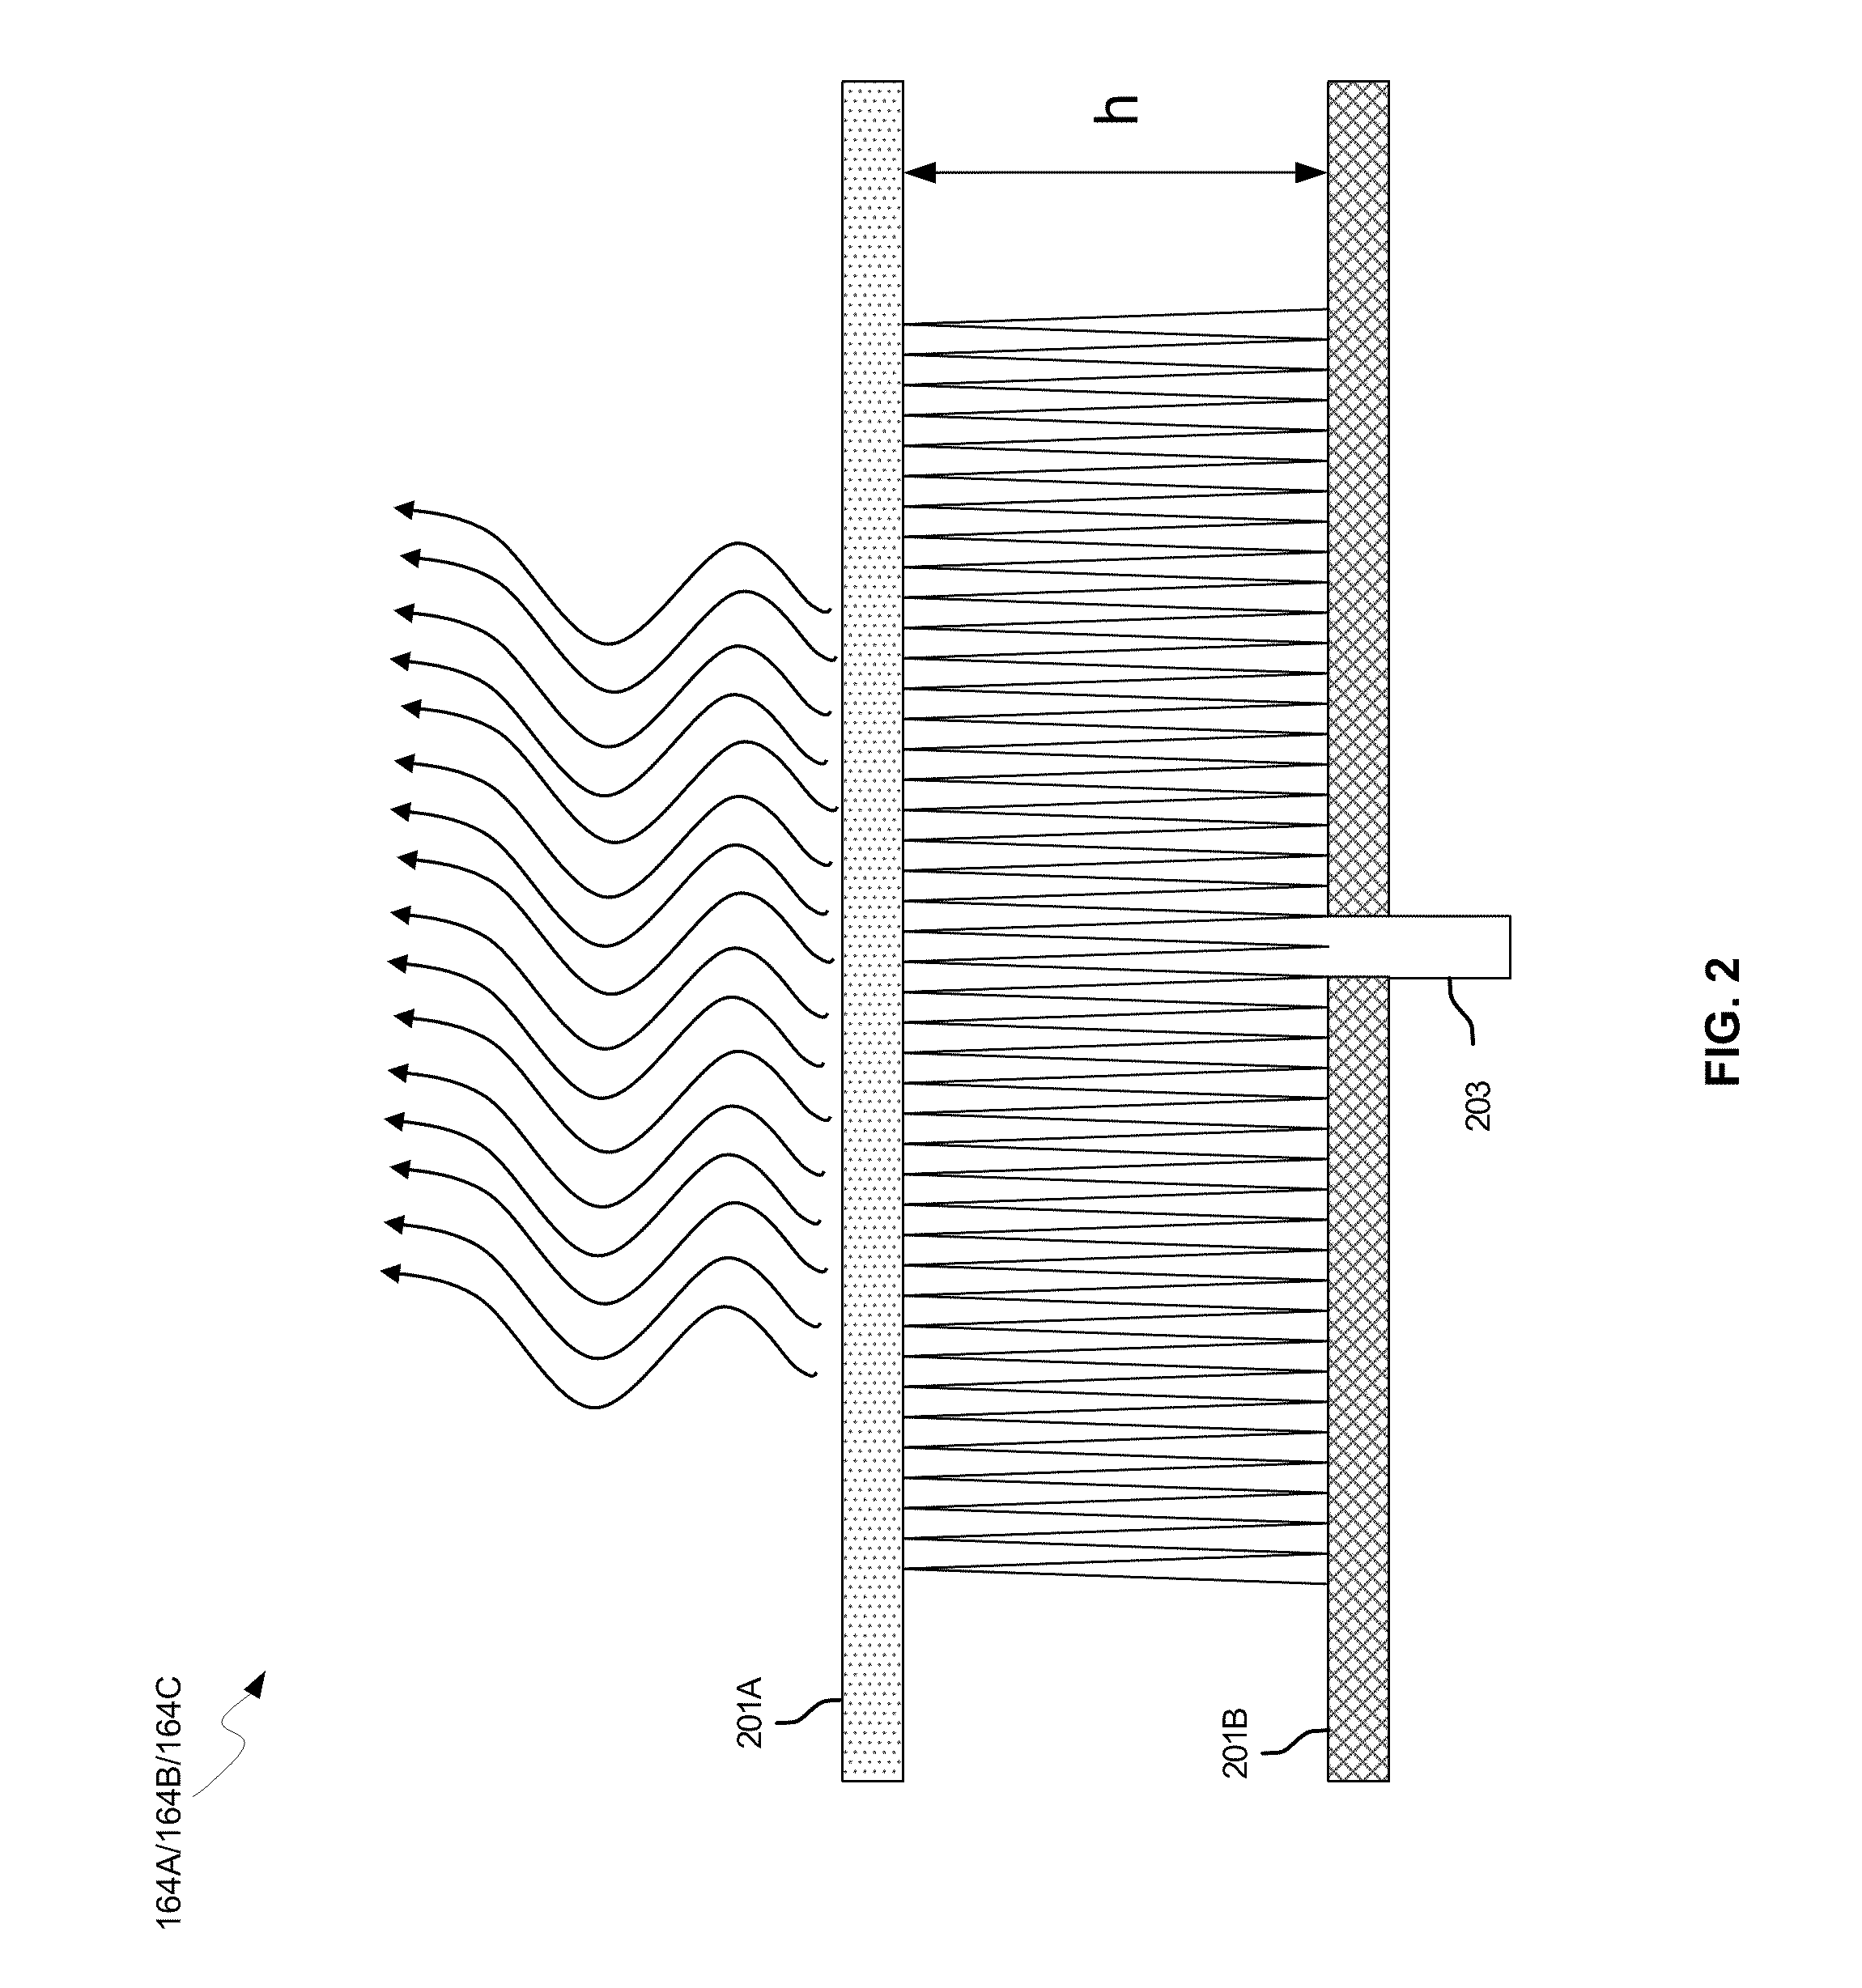 Method and System for a Voltage-Controlled Oscillator with a Leaky Wave Antenna